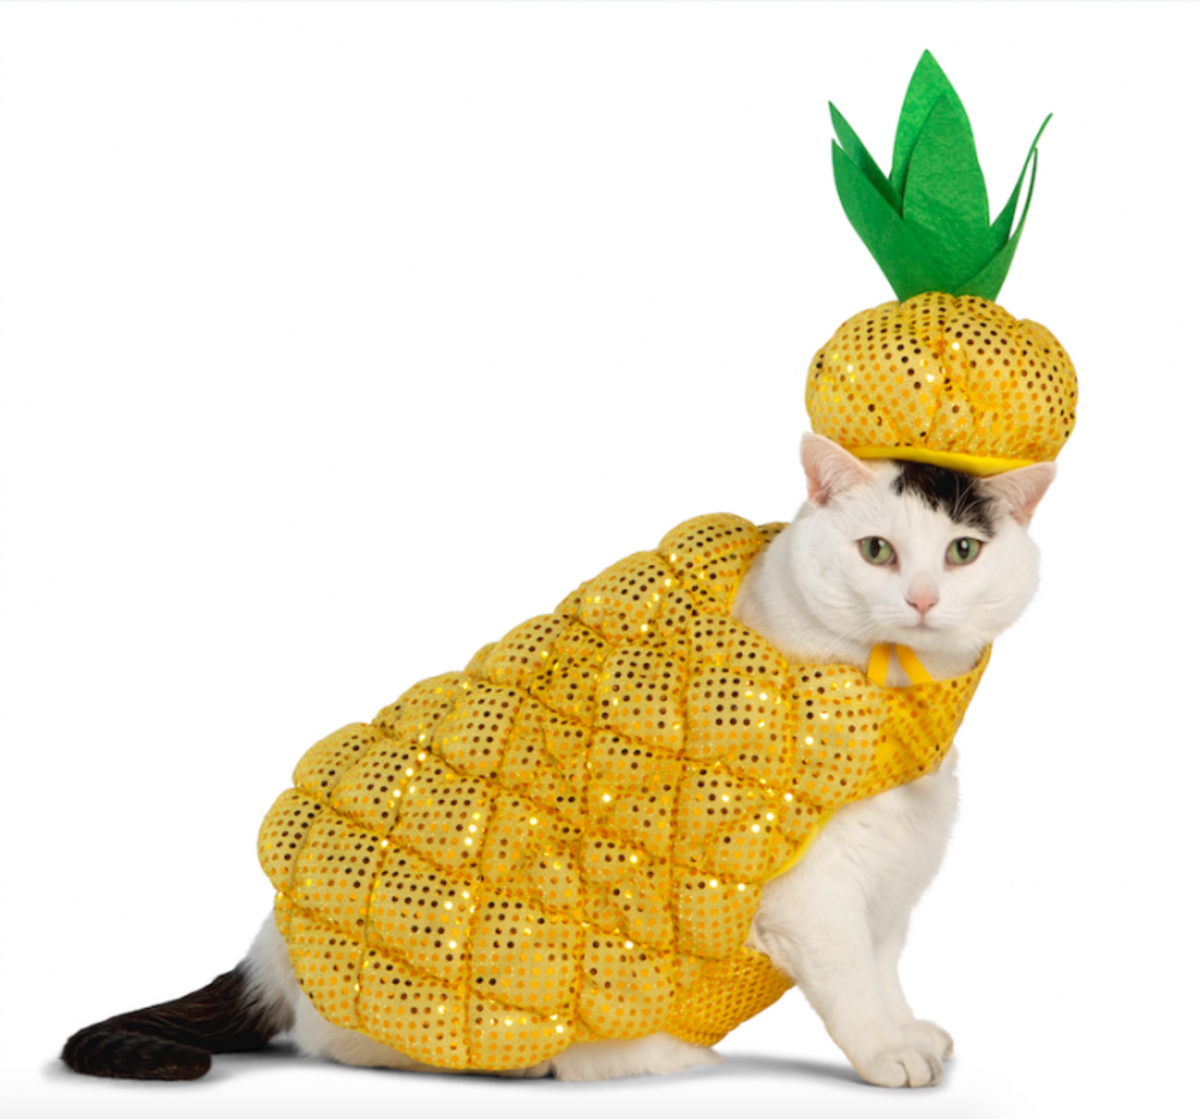 derrick rawn recommends pictures of kittens in costumes pic